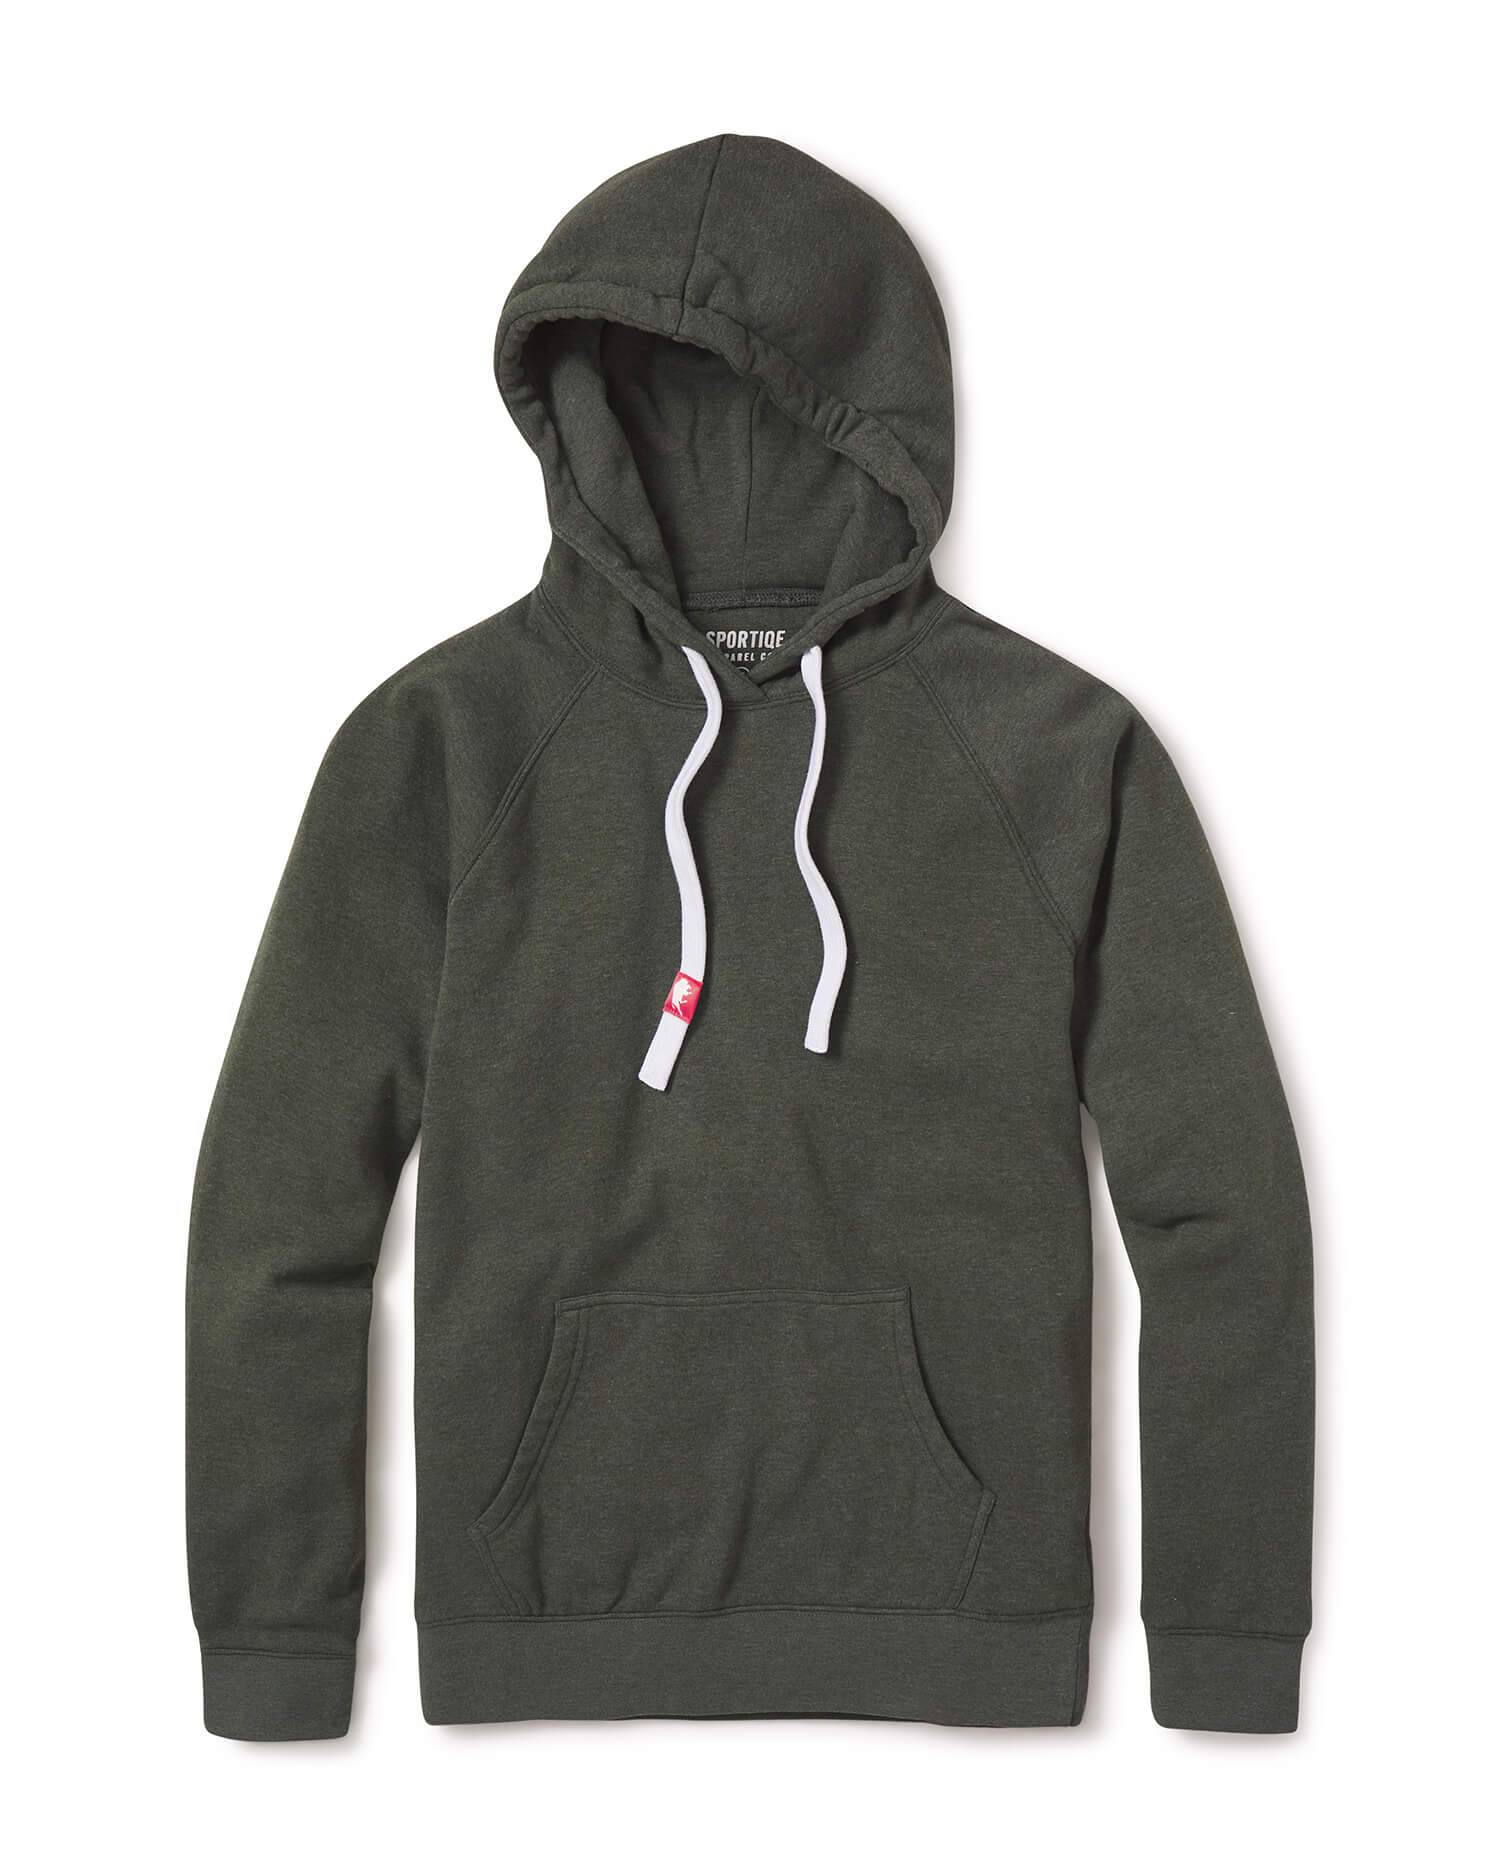 Superdry Gym Tech Court Overhead Hoodie  Hoodie outfit men, Mens outfits,  Gym outfit men